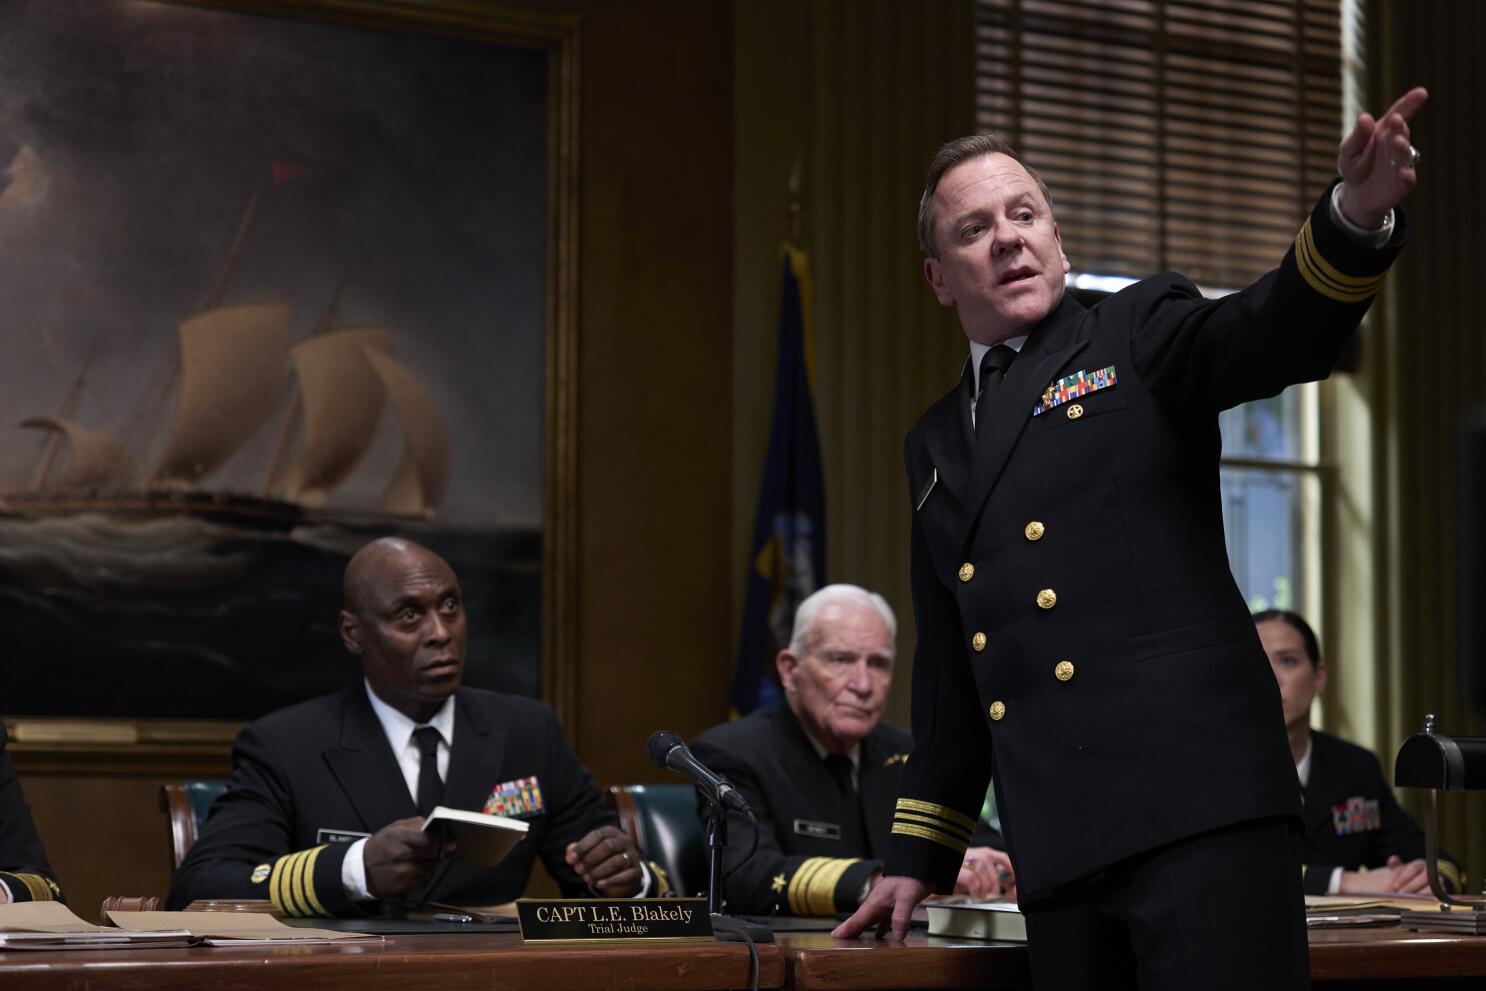 The Caine Mutiny Court-Martial' review: William Friedkin's last film an  engrossing achievement - Chicago Sun-Times